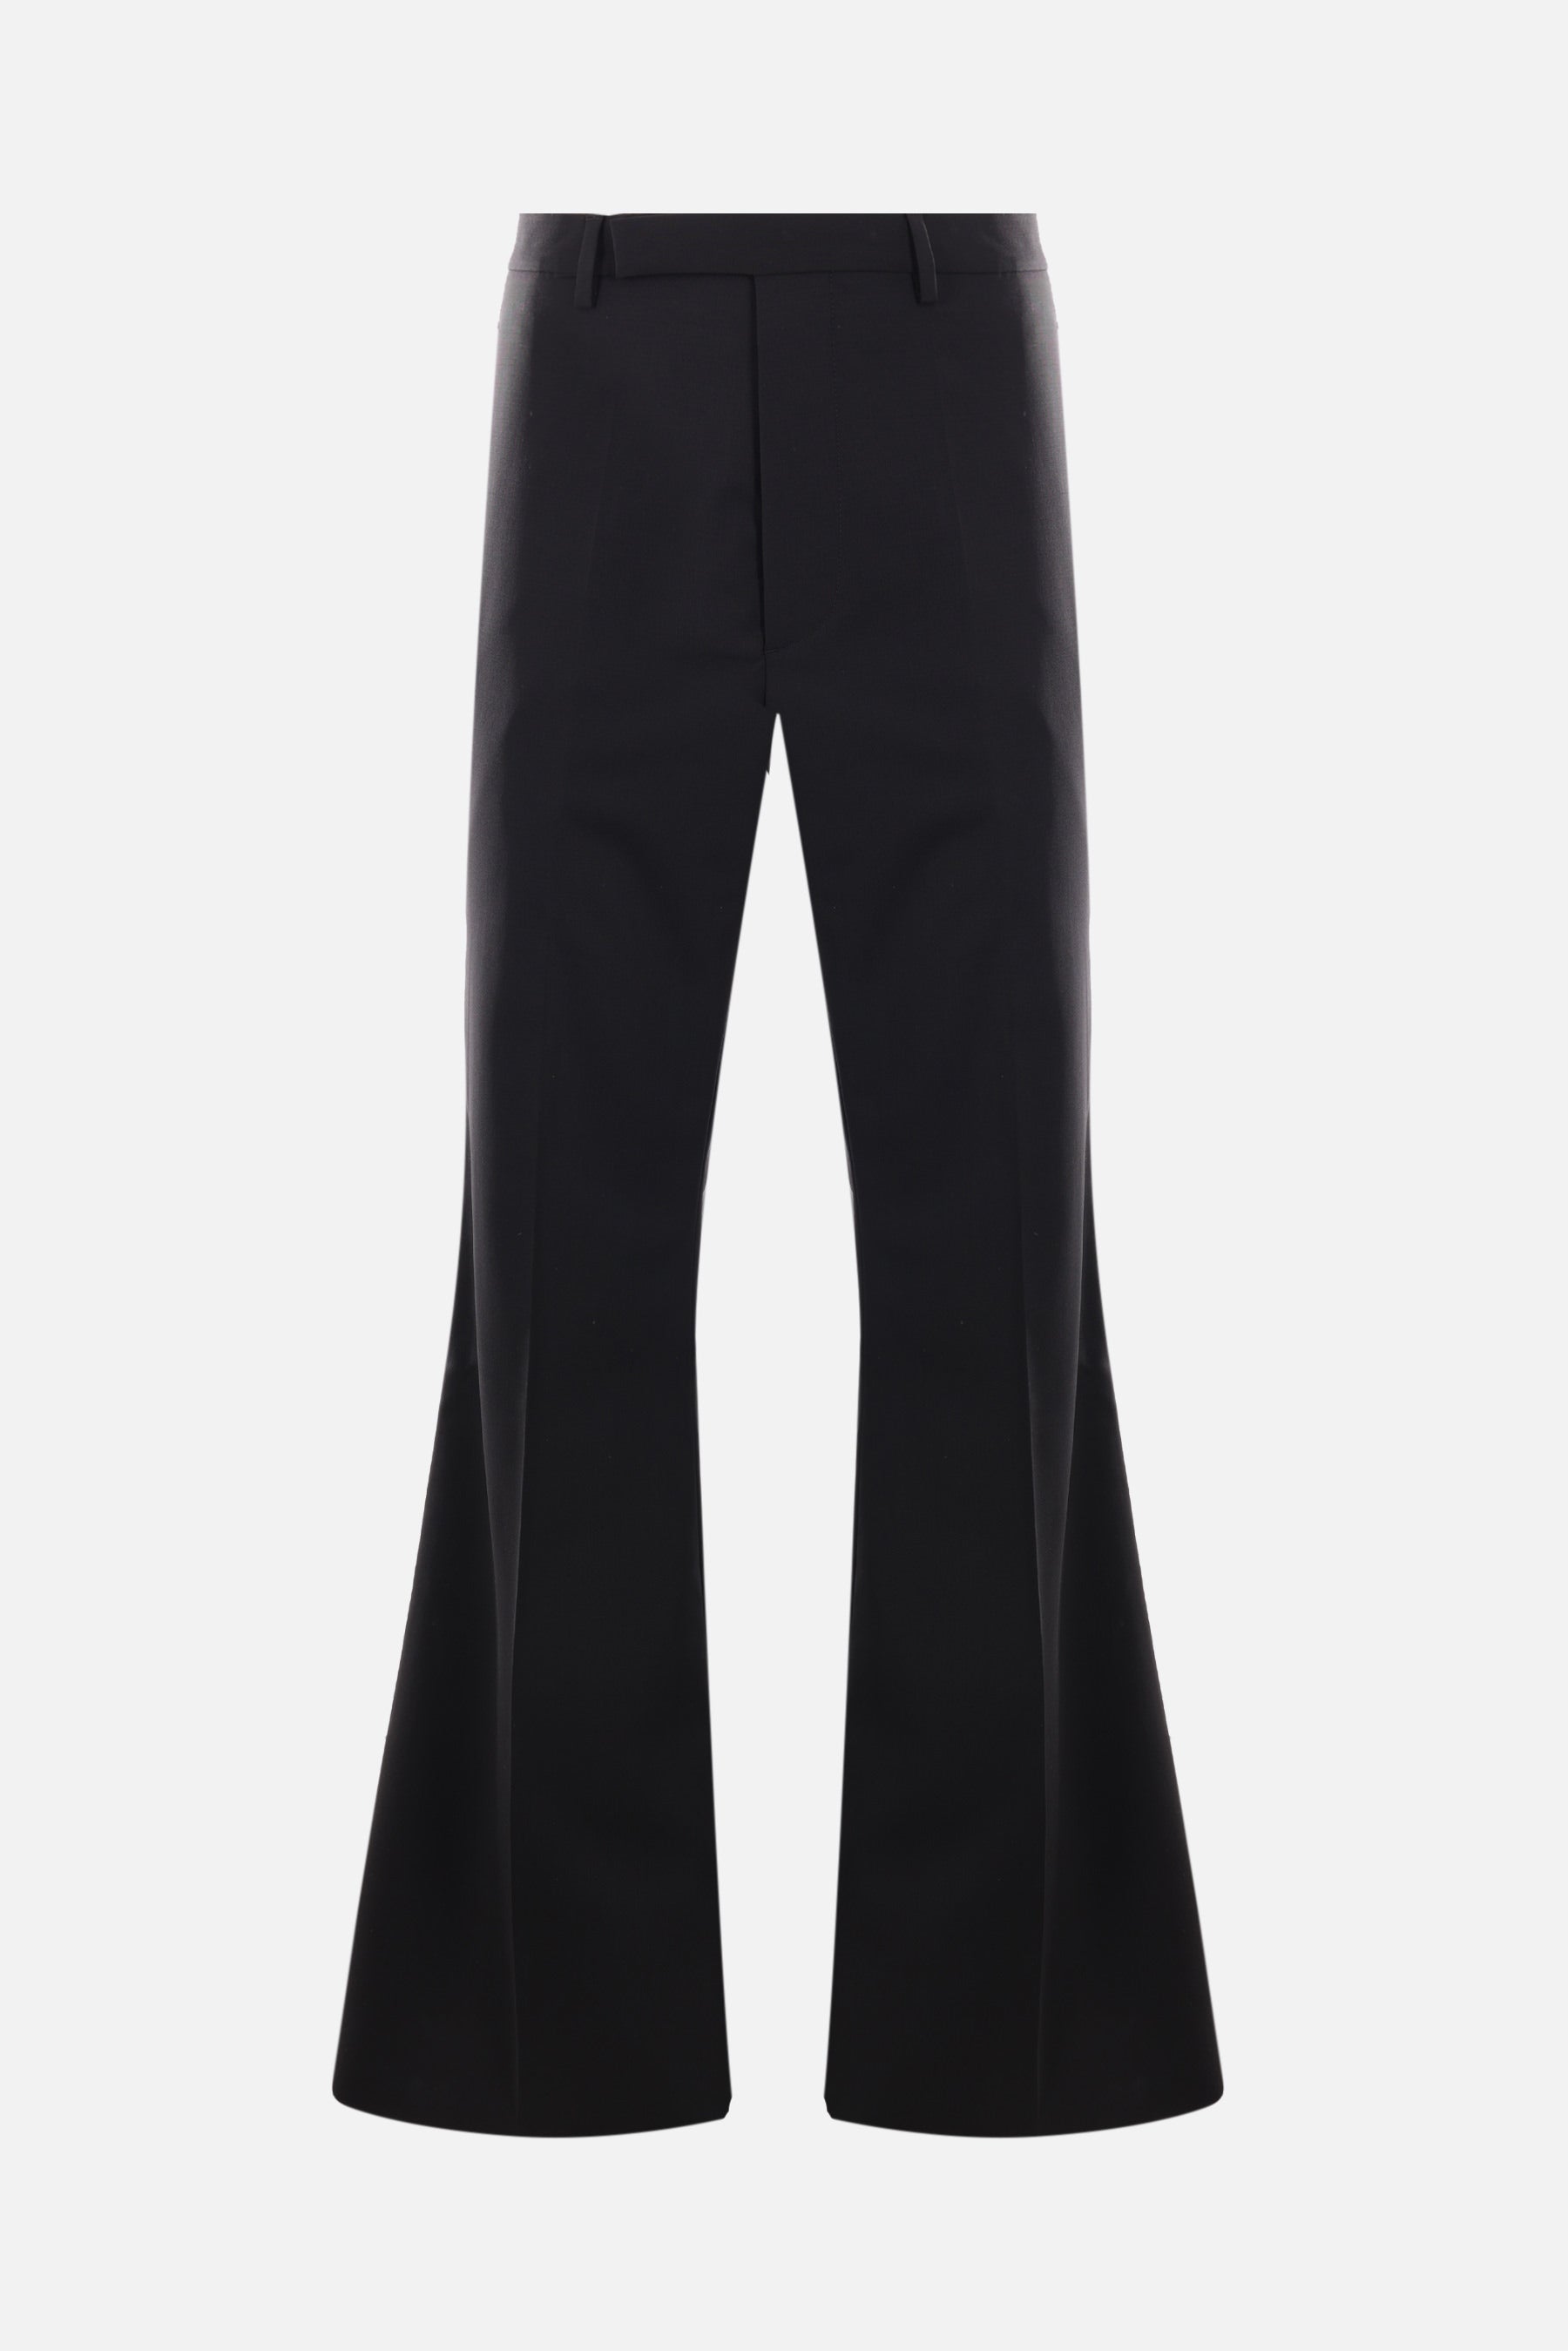 Astaires stretch wool flare pants